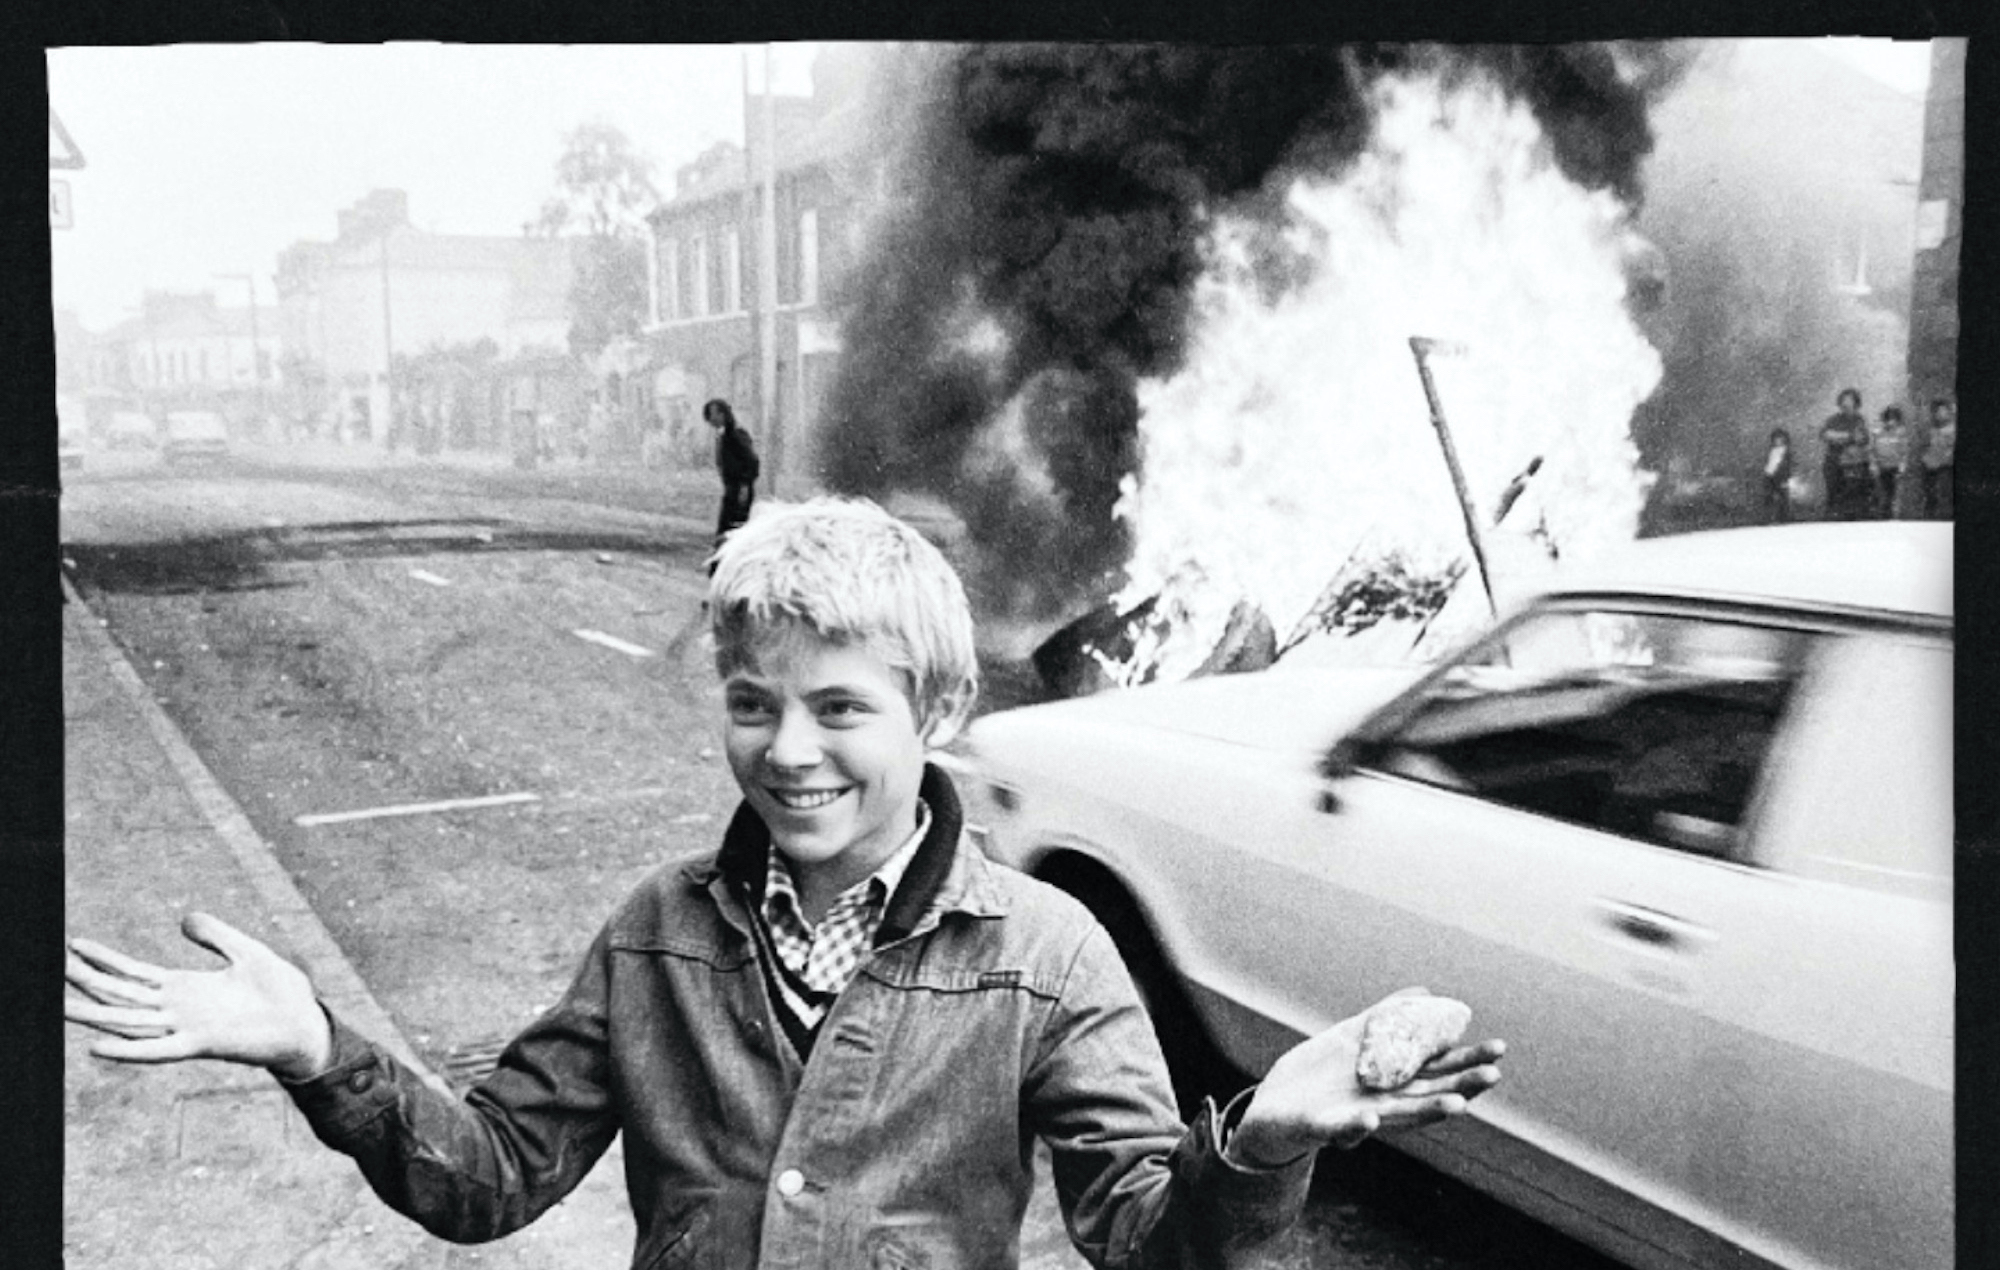 Green Day’s ‘Saviors’ artwork is photo from the Troubles in Belfast